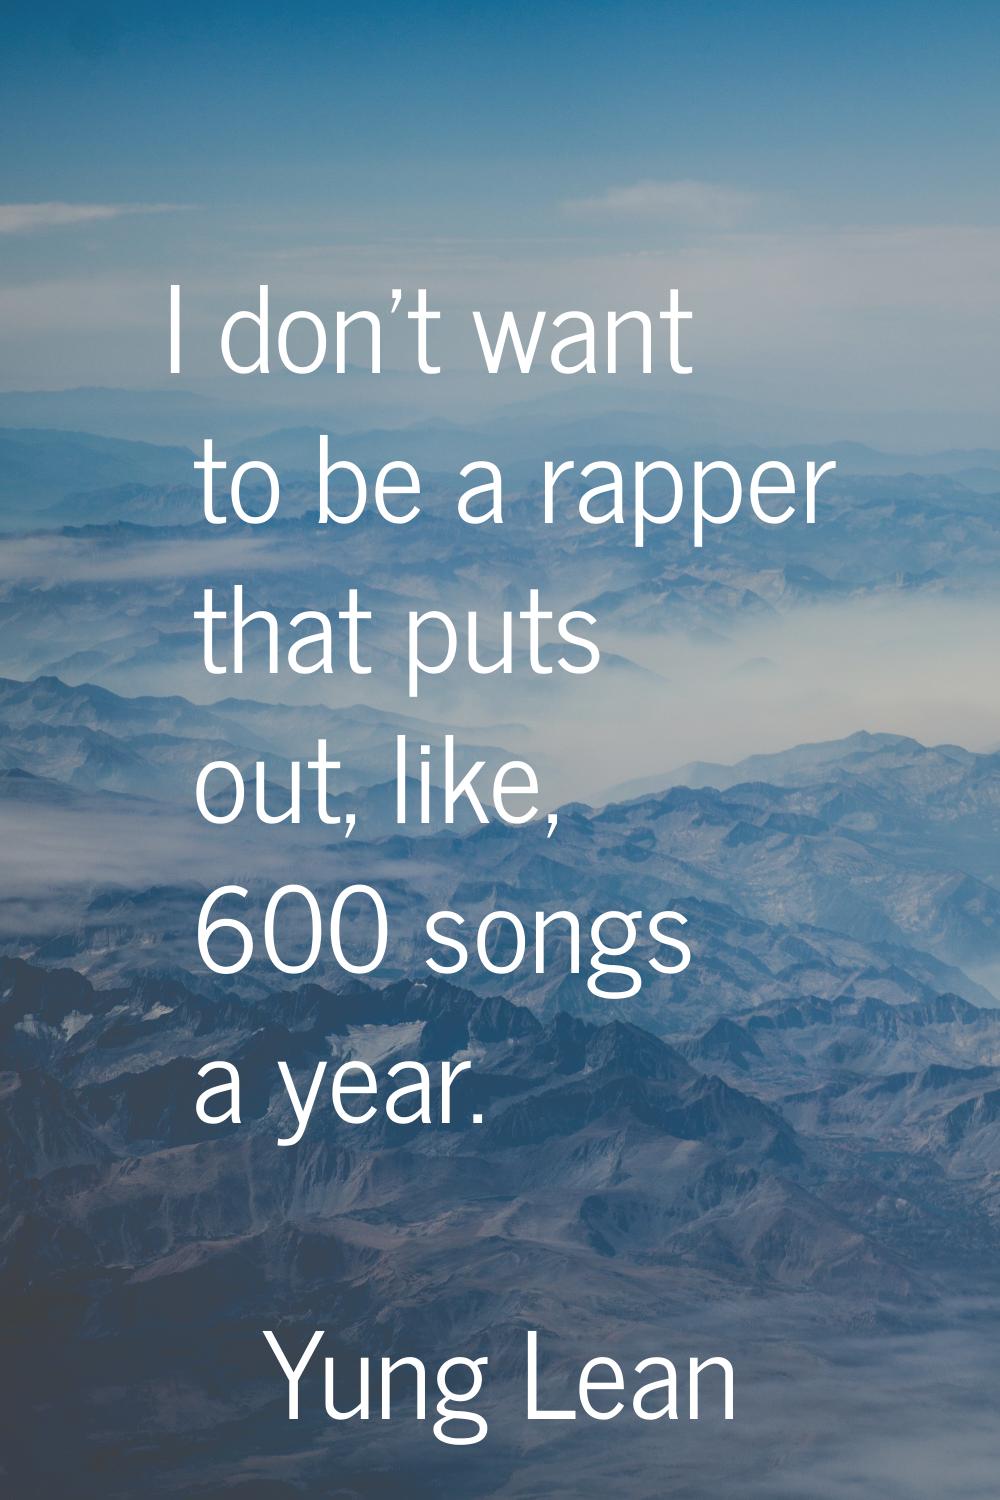 I don't want to be a rapper that puts out, like, 600 songs a year.